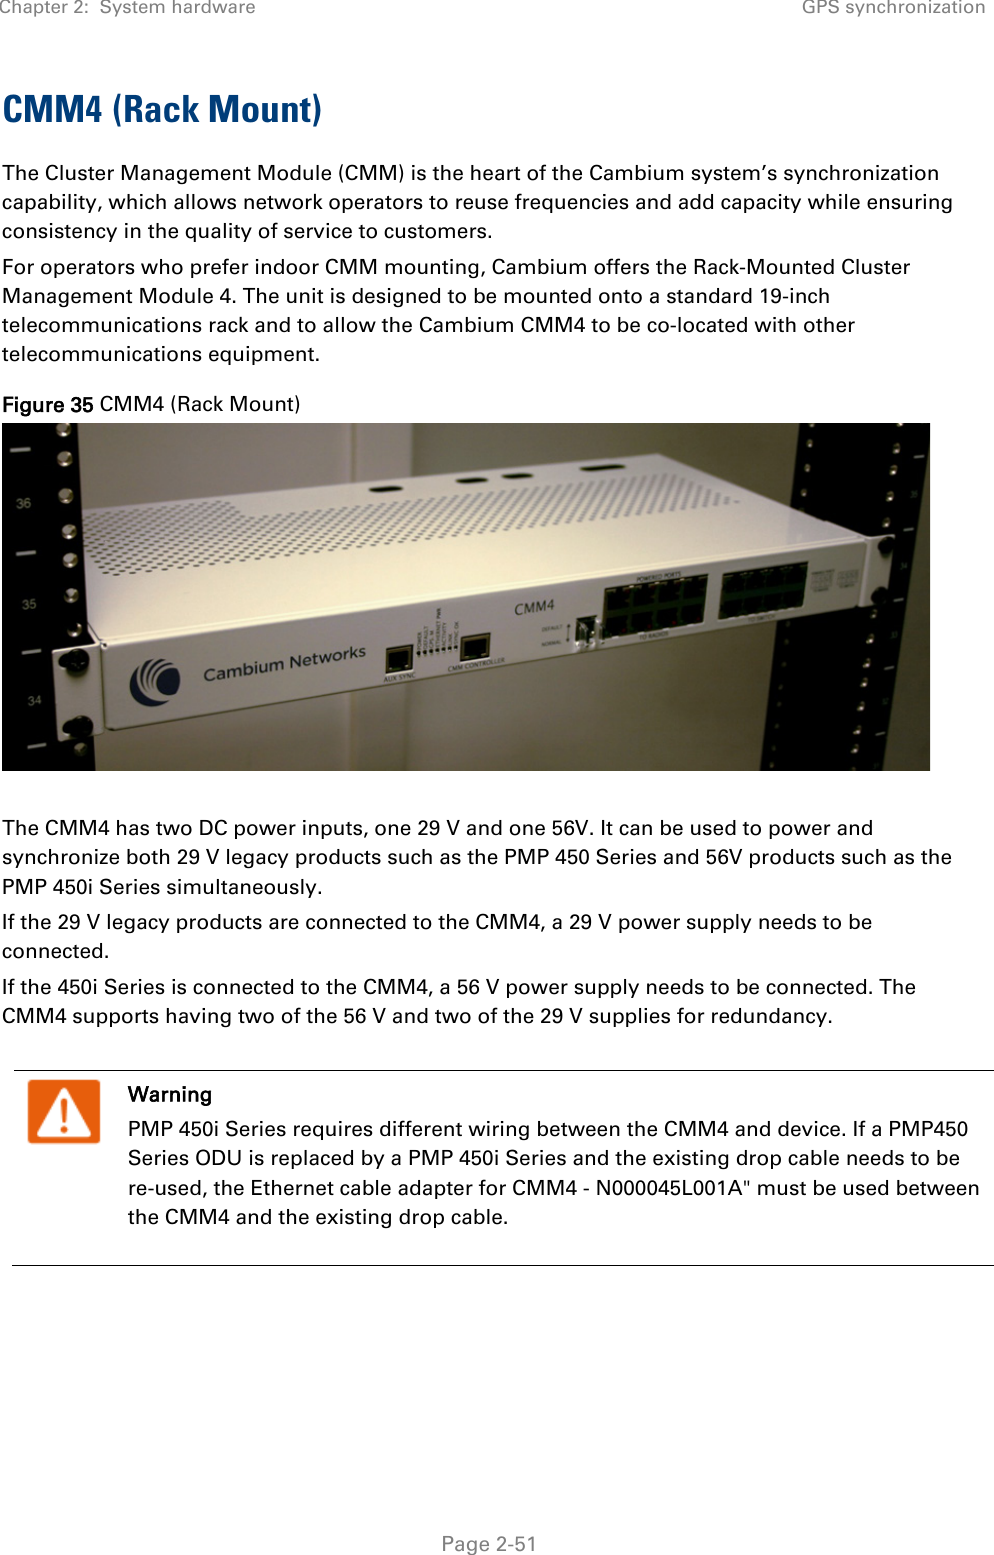 Chapter 2:  System hardware GPS synchronization   Page 2-51 CMM4 (Rack Mount) The Cluster Management Module (CMM) is the heart of the Cambium system’s synchronization capability, which allows network operators to reuse frequencies and add capacity while ensuring consistency in the quality of service to customers.  For operators who prefer indoor CMM mounting, Cambium offers the Rack-Mounted Cluster Management Module 4. The unit is designed to be mounted onto a standard 19-inch telecommunications rack and to allow the Cambium CMM4 to be co-located with other telecommunications equipment. Figure 35 CMM4 (Rack Mount)   The CMM4 has two DC power inputs, one 29 V and one 56V. It can be used to power and synchronize both 29 V legacy products such as the PMP 450 Series and 56V products such as the PMP 450i Series simultaneously. If the 29 V legacy products are connected to the CMM4, a 29 V power supply needs to be connected.  If the 450i Series is connected to the CMM4, a 56 V power supply needs to be connected. The CMM4 supports having two of the 56 V and two of the 29 V supplies for redundancy.    Warning PMP 450i Series requires different wiring between the CMM4 and device. If a PMP450 Series ODU is replaced by a PMP 450i Series and the existing drop cable needs to be re-used, the Ethernet cable adapter for CMM4 - N000045L001A&quot; must be used between the CMM4 and the existing drop cable. 